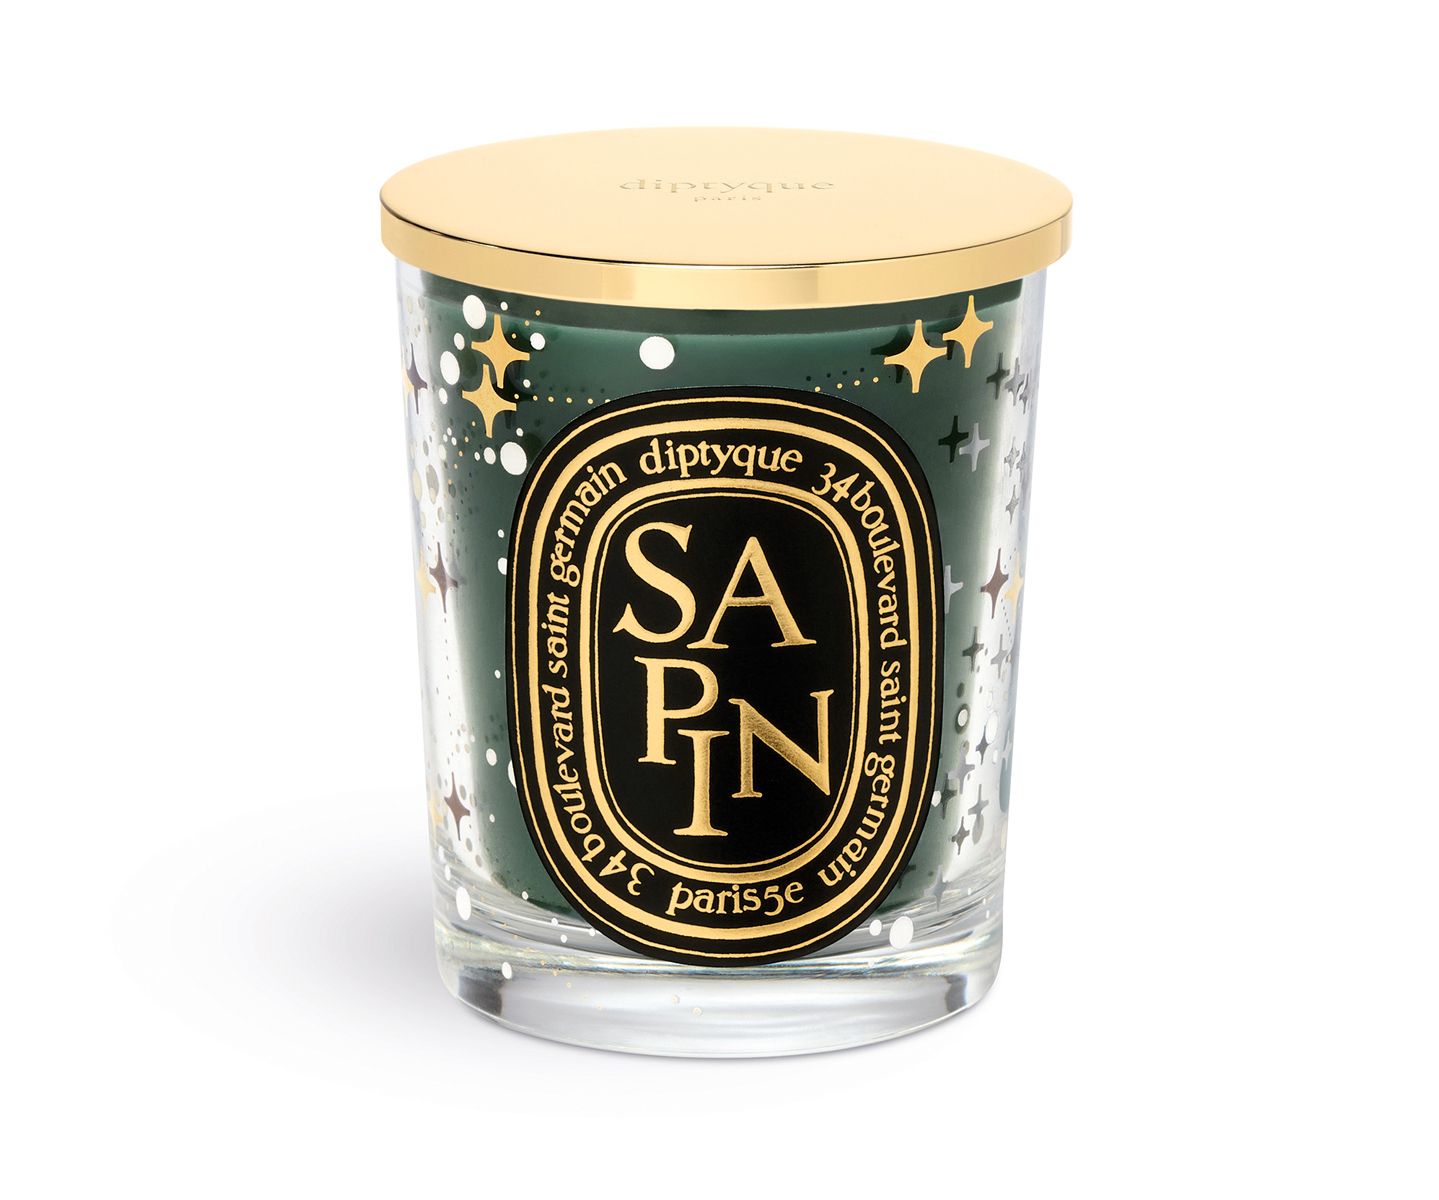 Sapin / Pine Tree candle 190g – Limited Edition | diptyque (US)